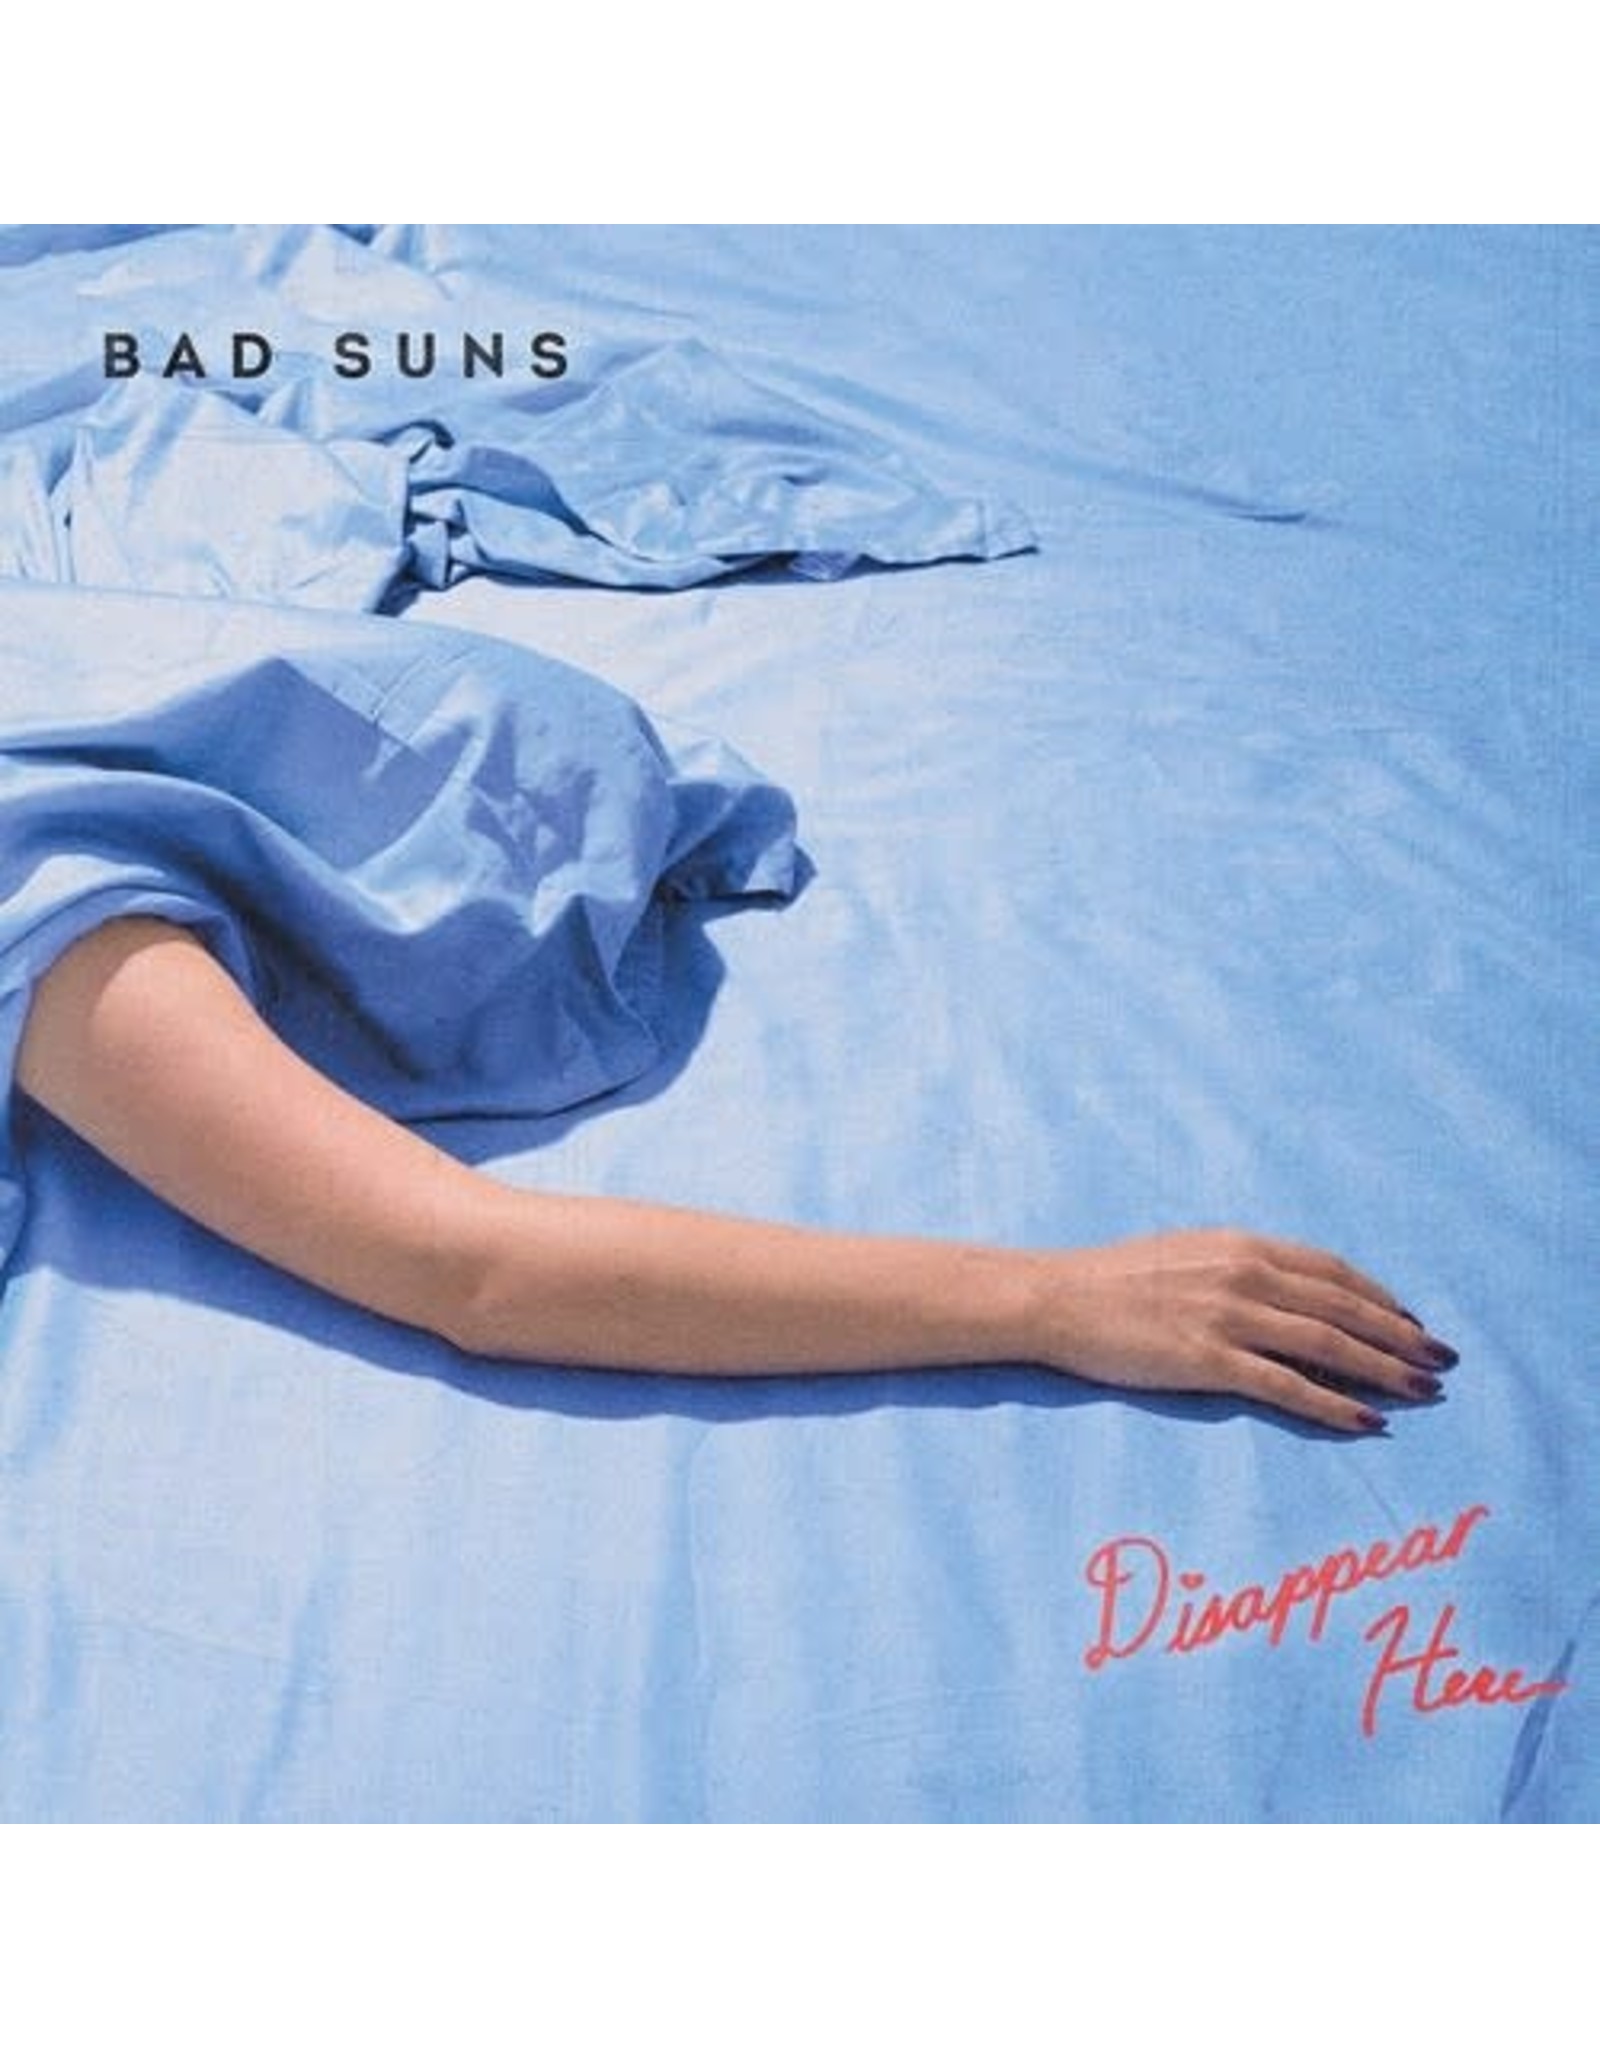 Bad Suns - Disappear Here